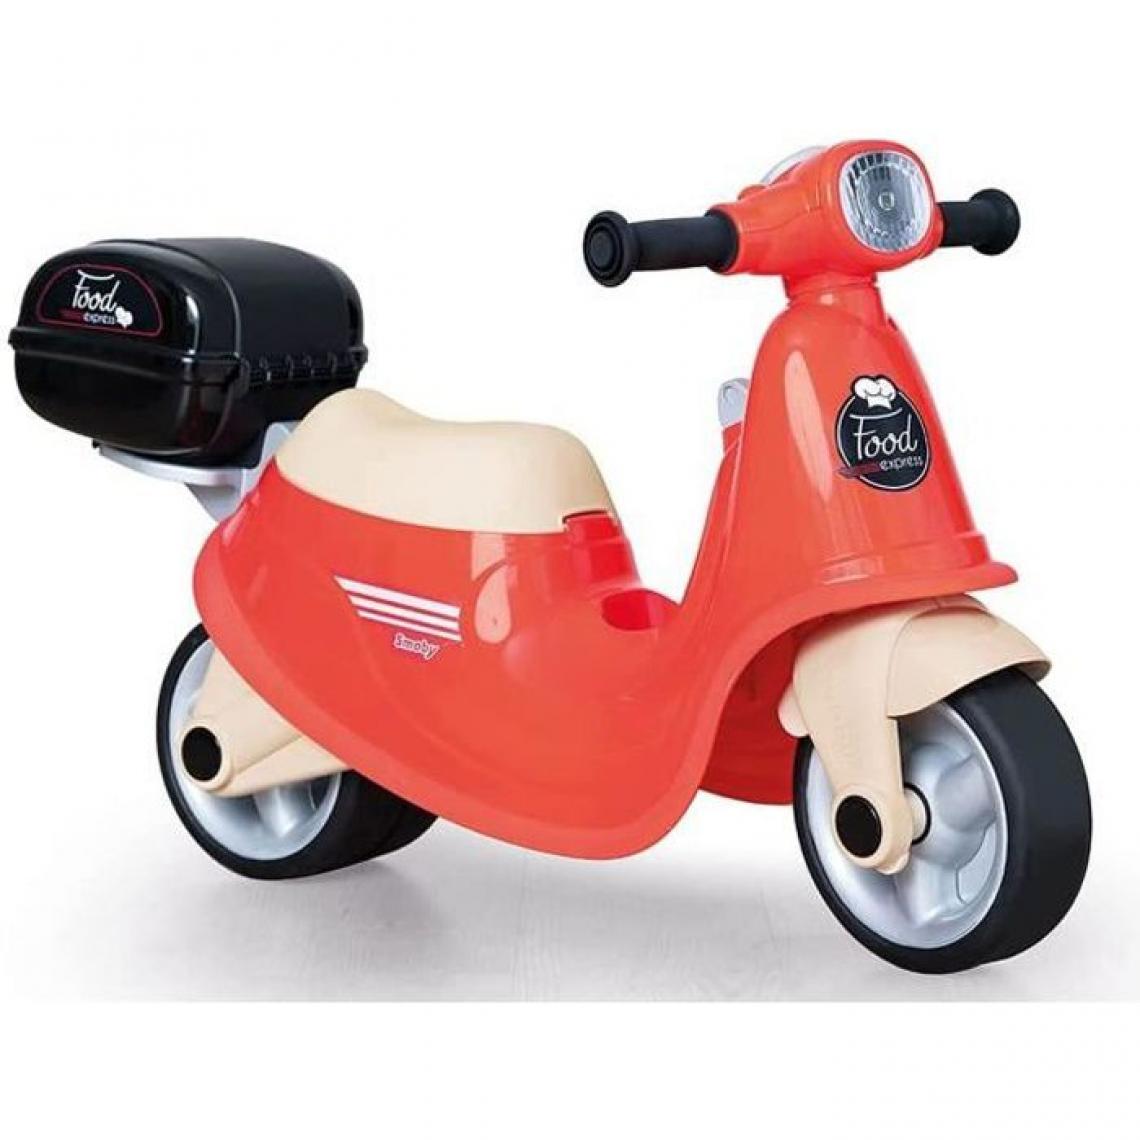 Smoby - Smoby - Porteur Scooter Food Express - Pour Enfant Des 18 Mois - Roues Silencieuses - Porte-Bagage - Mallette Amovible - Tricycle